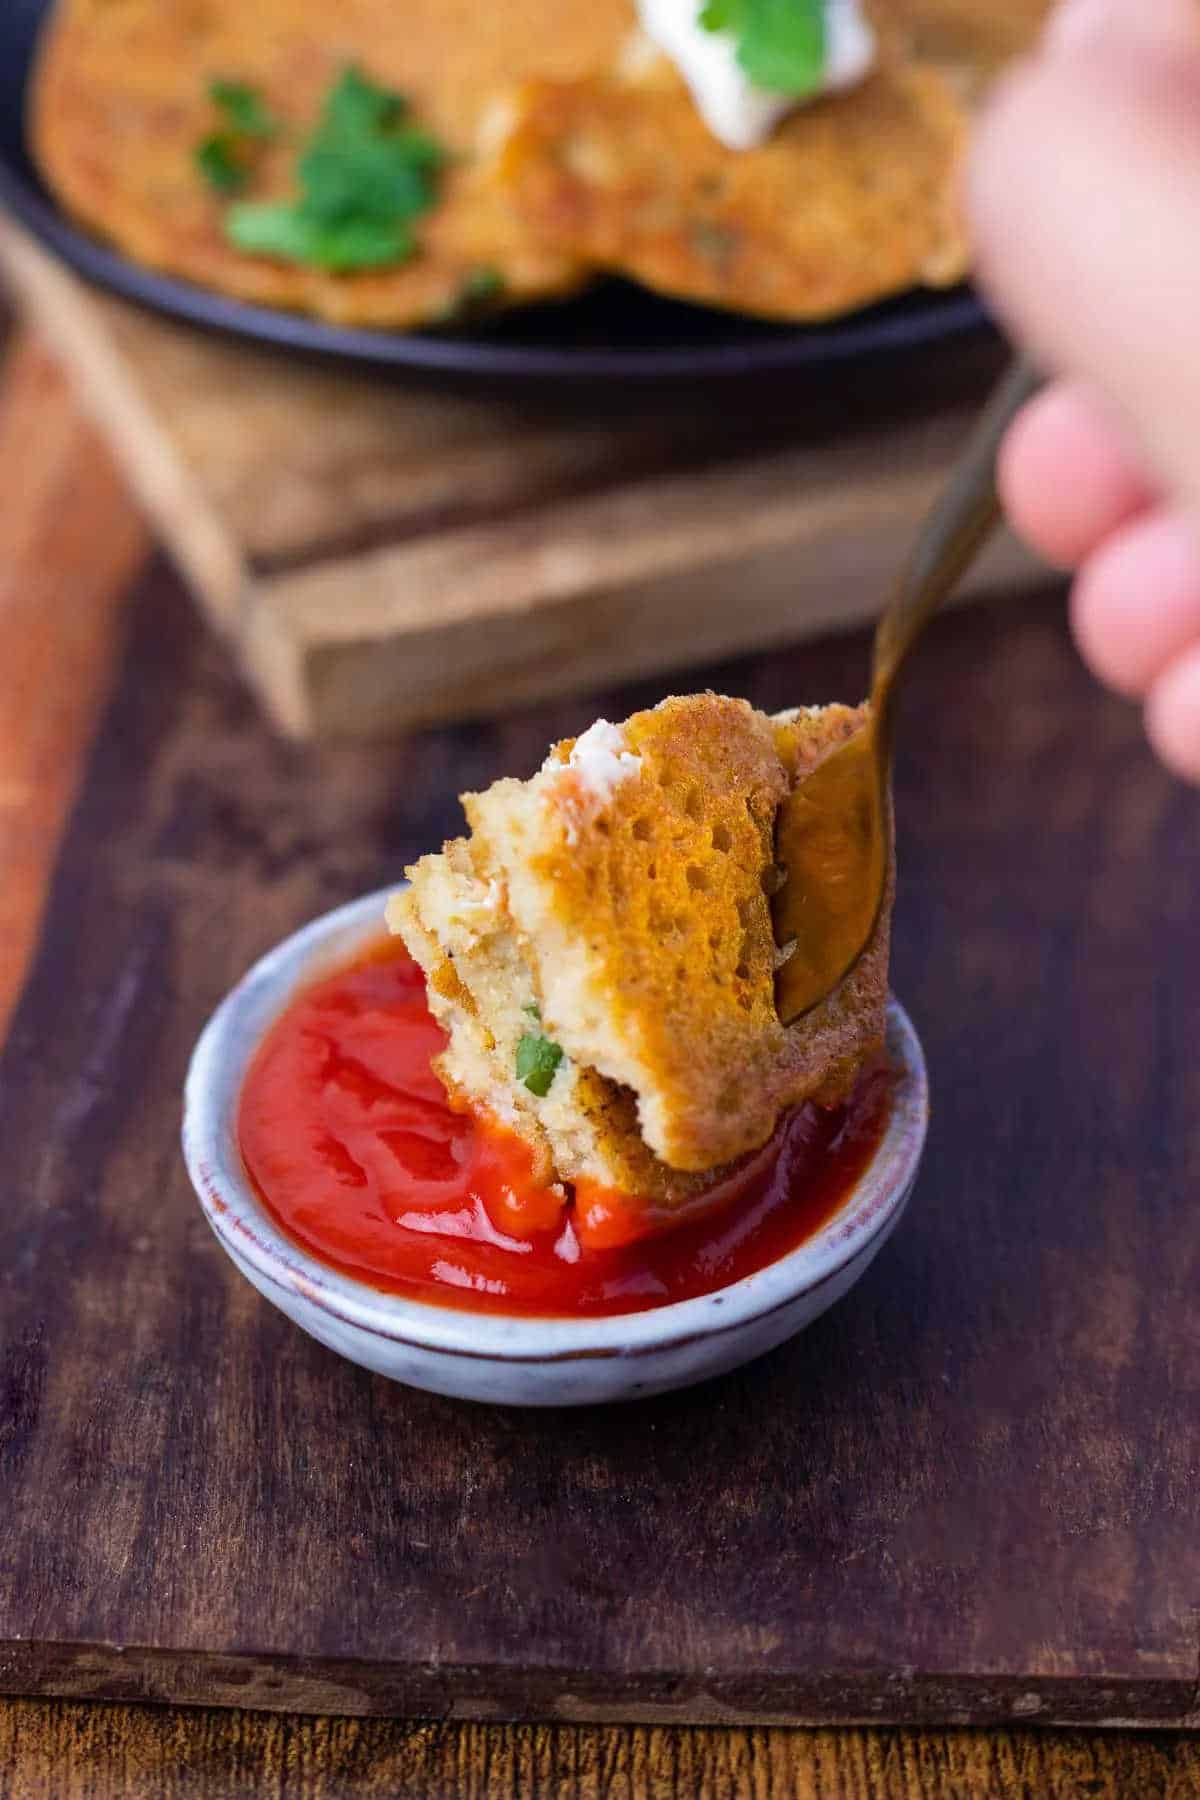 A slice of lentil pancake on a fork being dipped into tomato sauce.